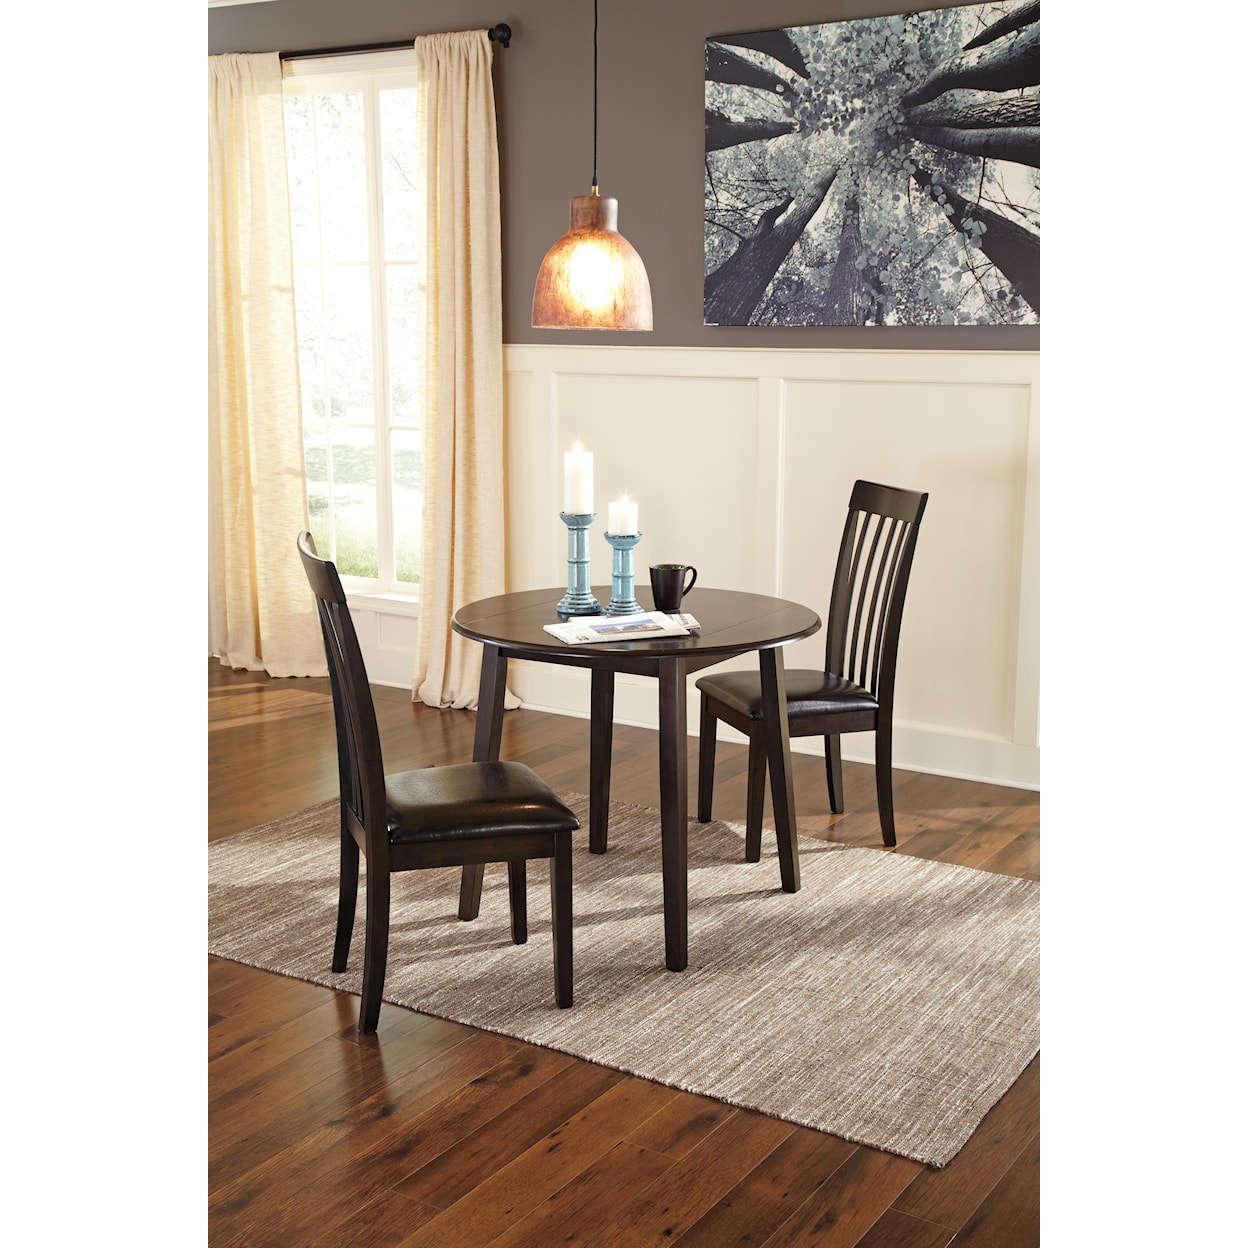 Signature Design by Ashley Hammis 3pc Dining Room Group